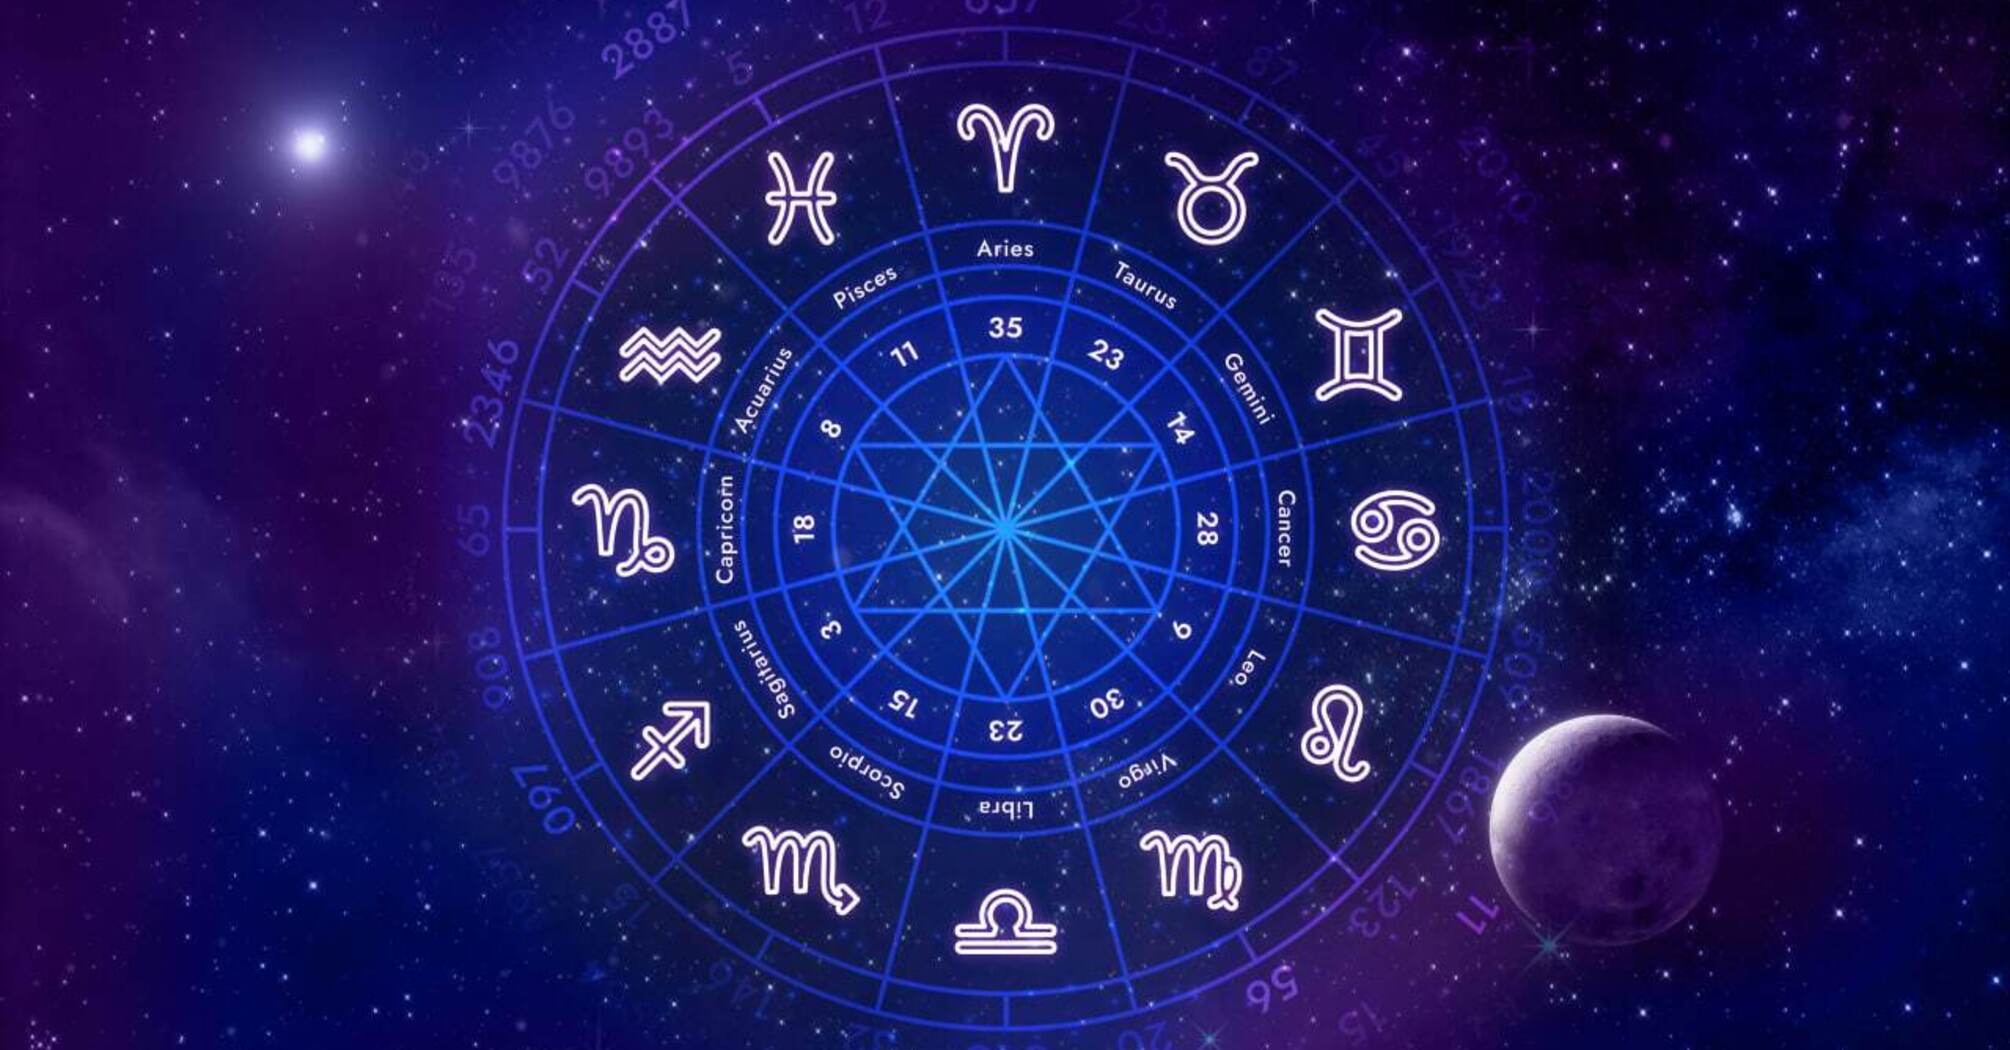 Horoscope for 12 signs